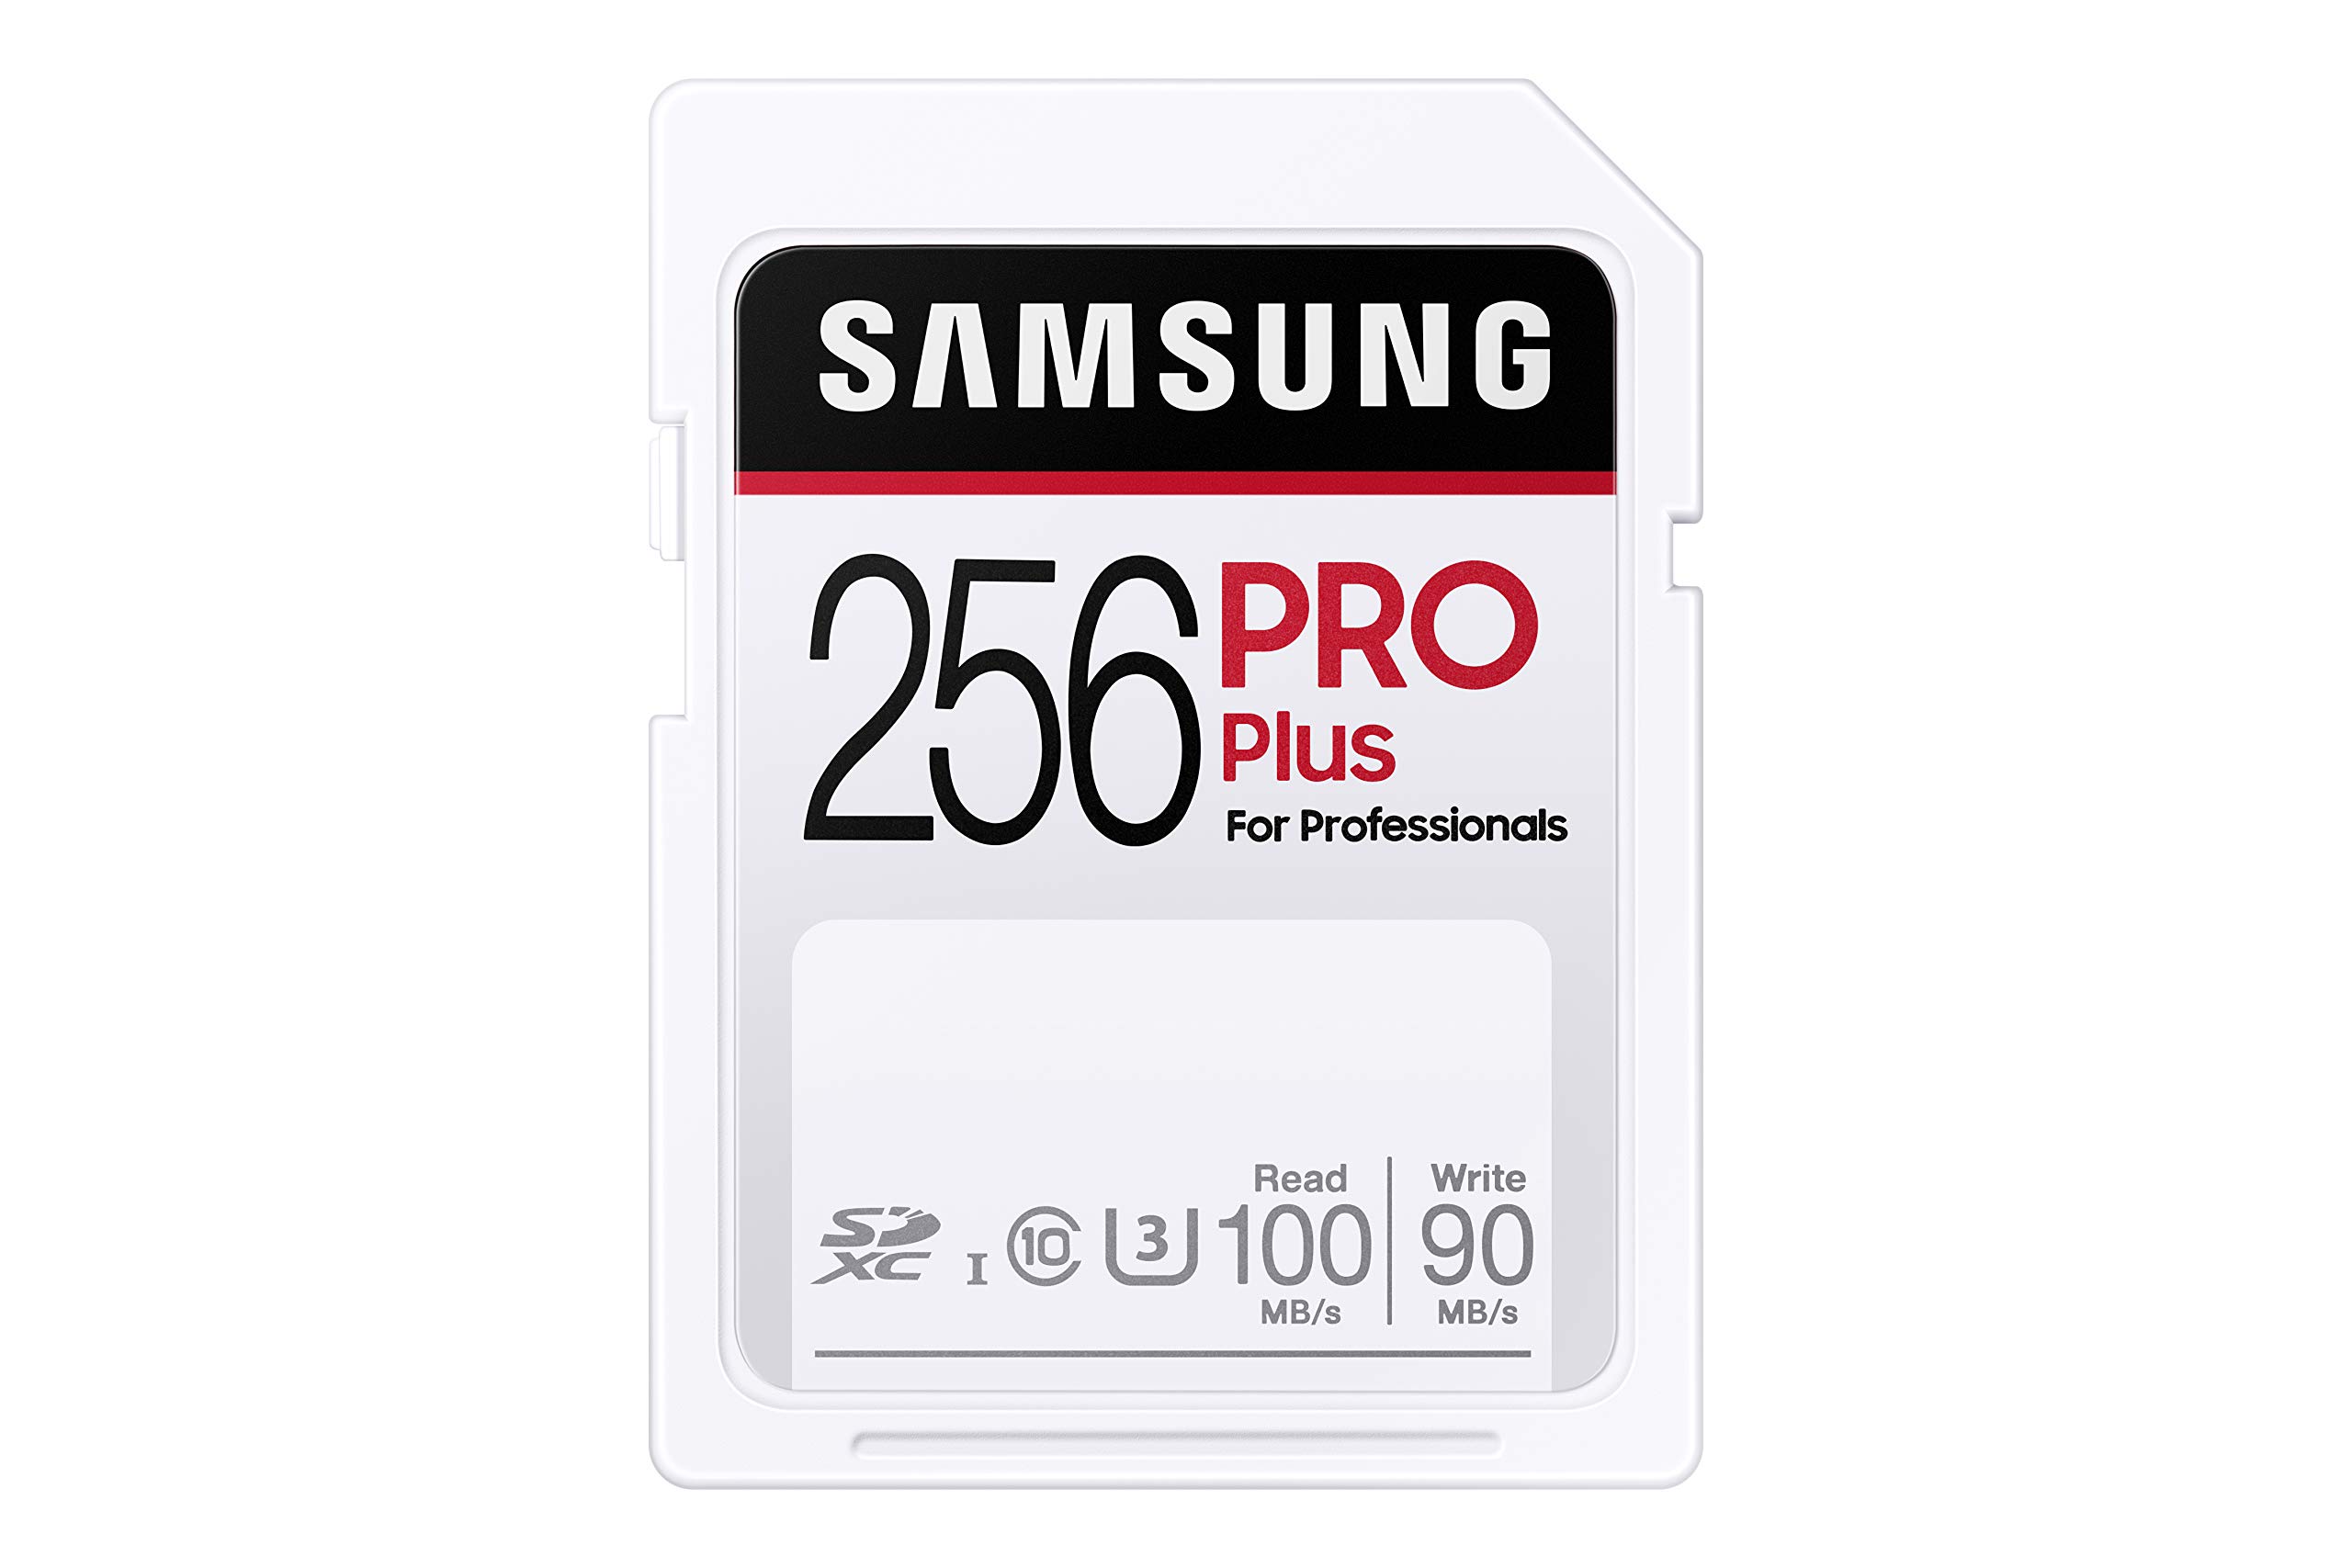 SAMSUNG PRO Plus SDXC 256GB Full Size SD Memory Card w/Adapter, Supports 4K UHD Video, Storage Expansion for Digital Media Professionals, Photographers, MB-SD256K/AM